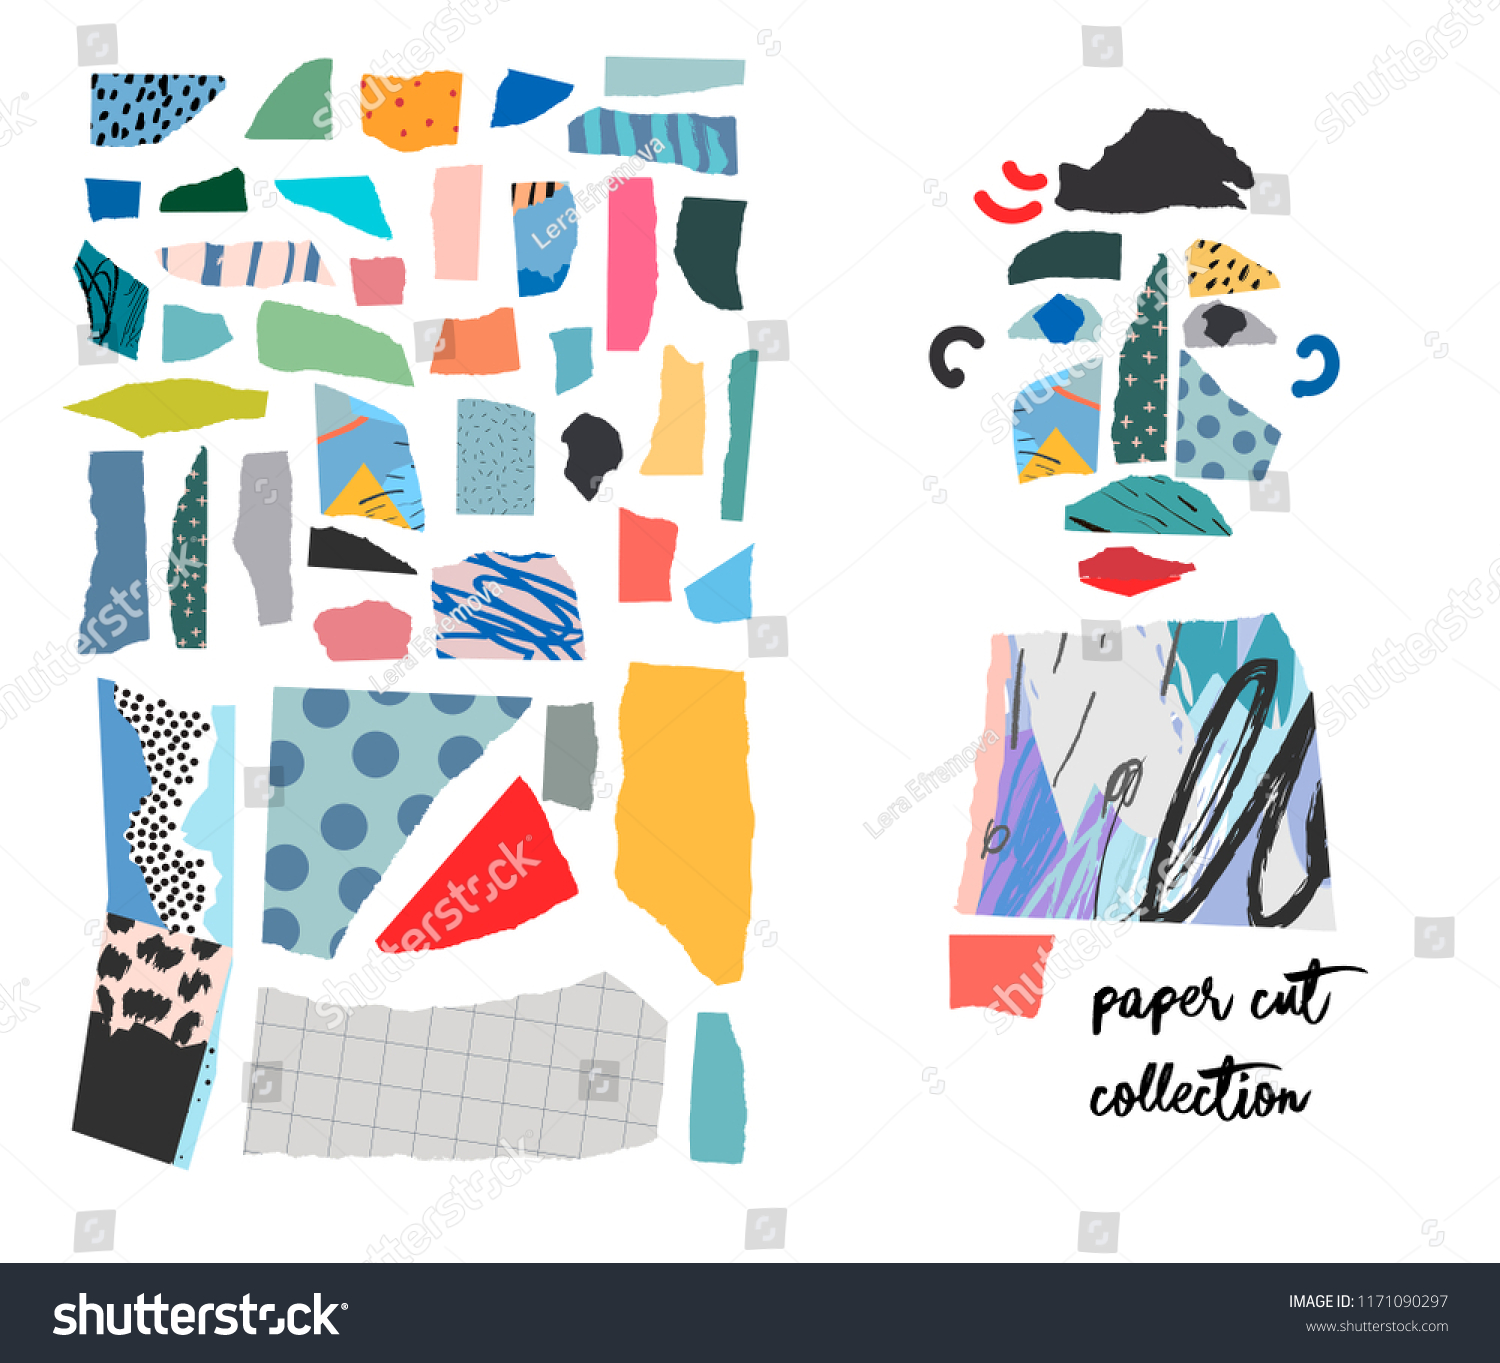 stock-vector-set-with-paper-cut-pieces-different-shapes-and-hand-drawn-textures-creative-fun-collage-1171090297